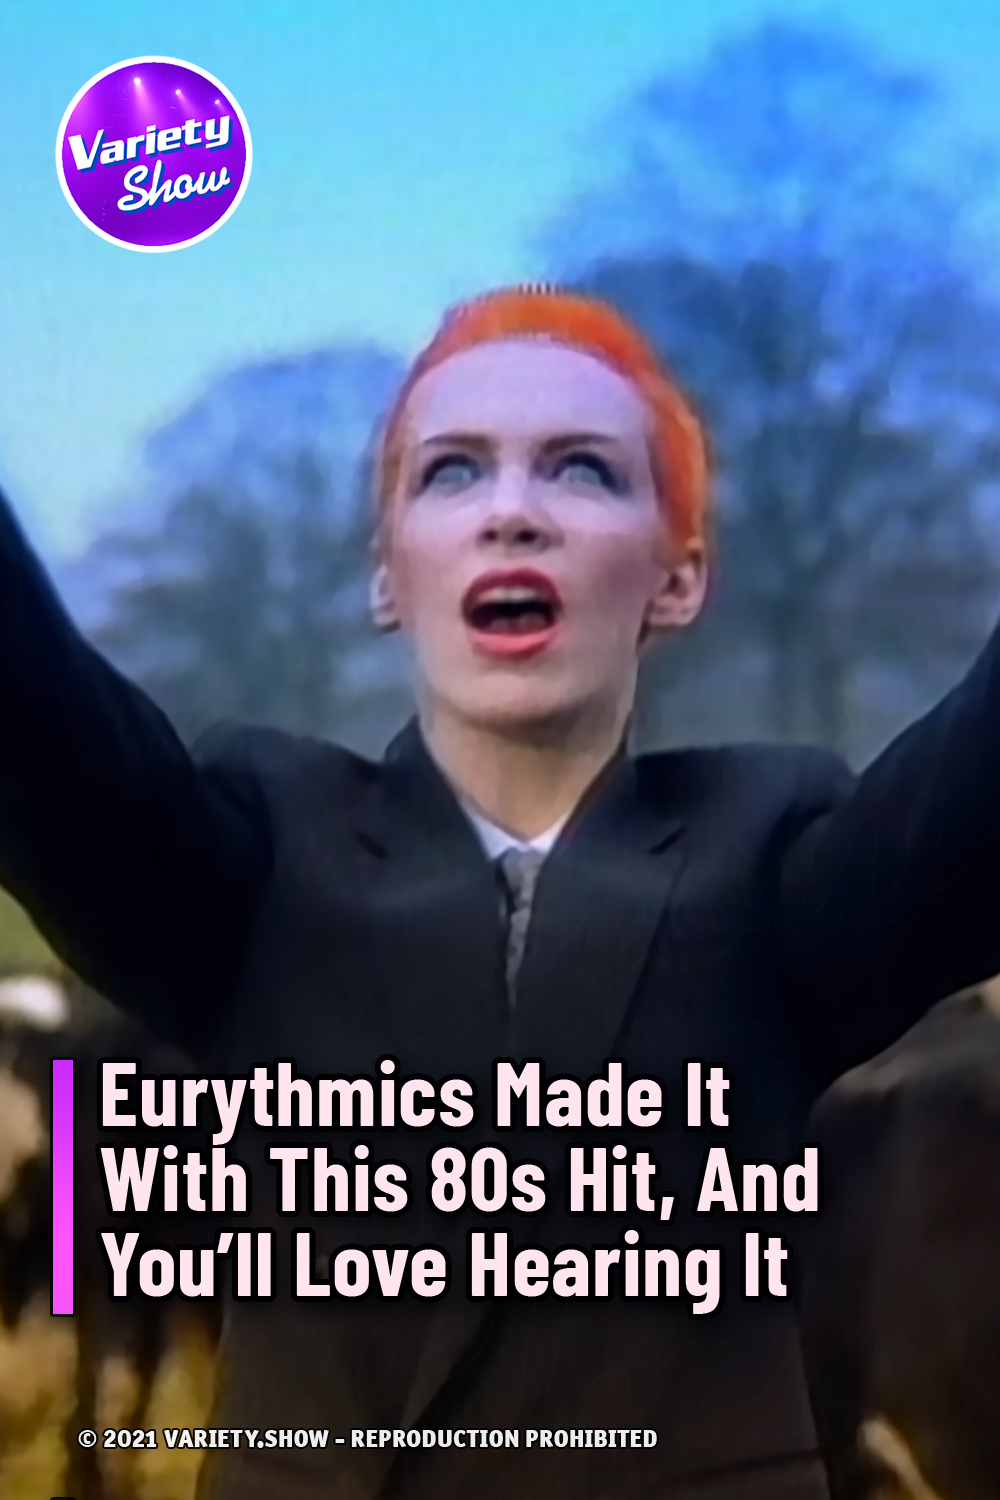 Eurythmics Made It With This 80s Hit, And You’ll Love Hearing It